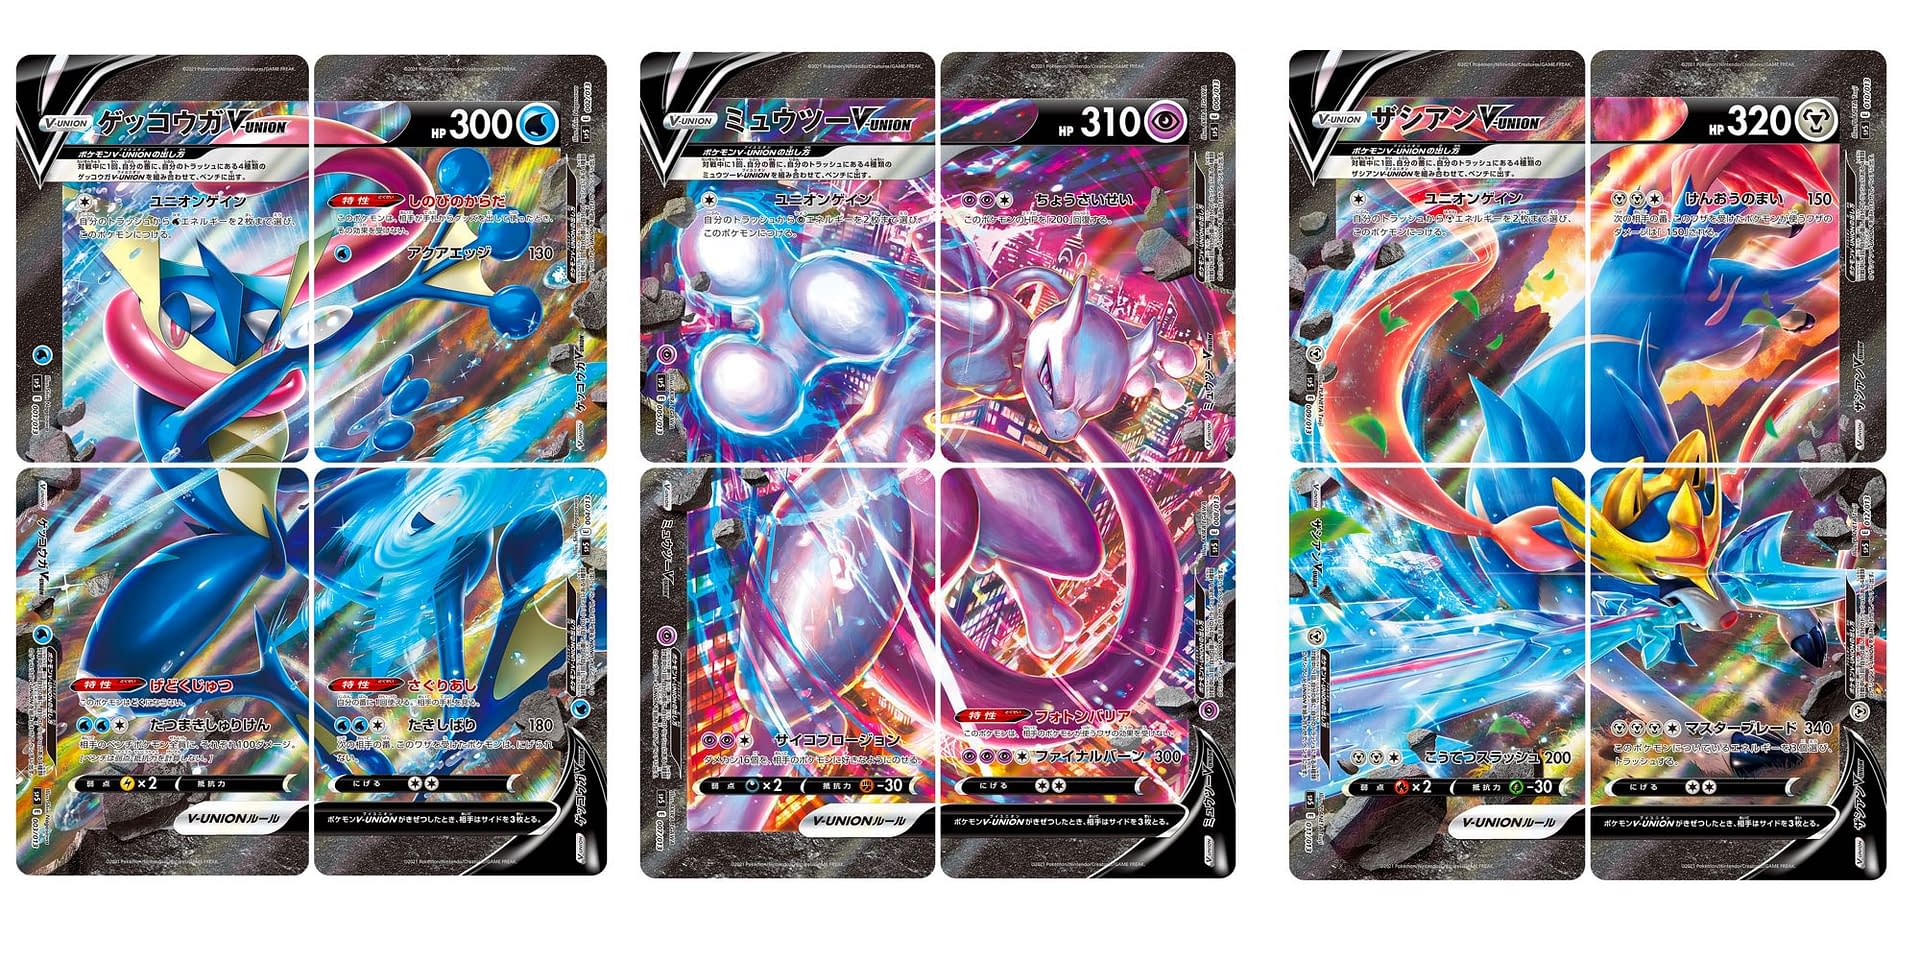 Pokémon TCG V-Union Will See Four Cards Combine To Make One